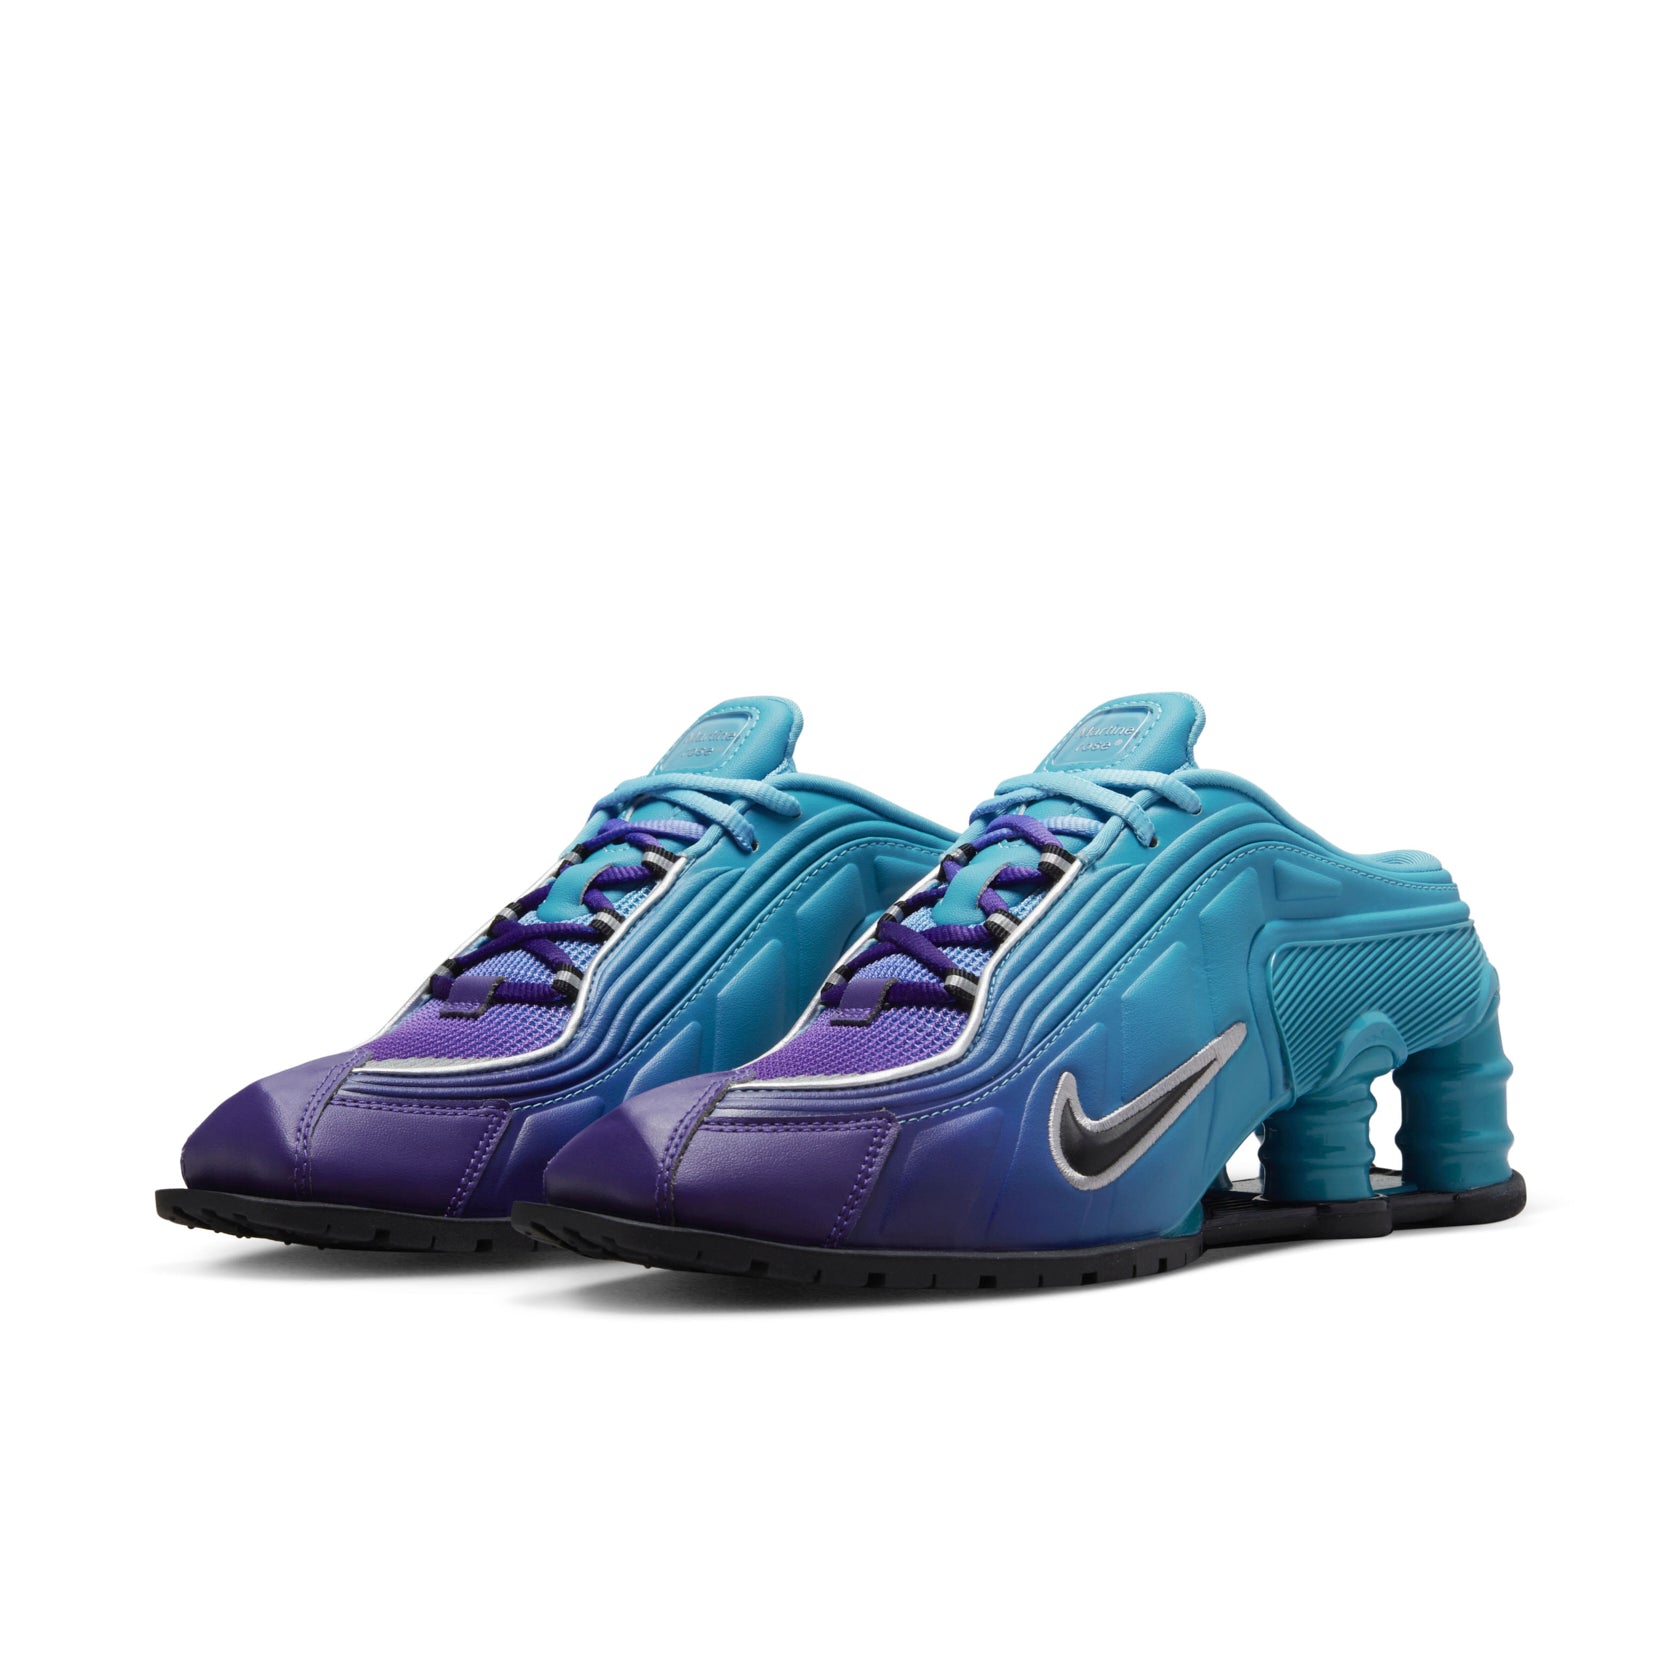 Nike Shox MR4 in Blue | Official Shop